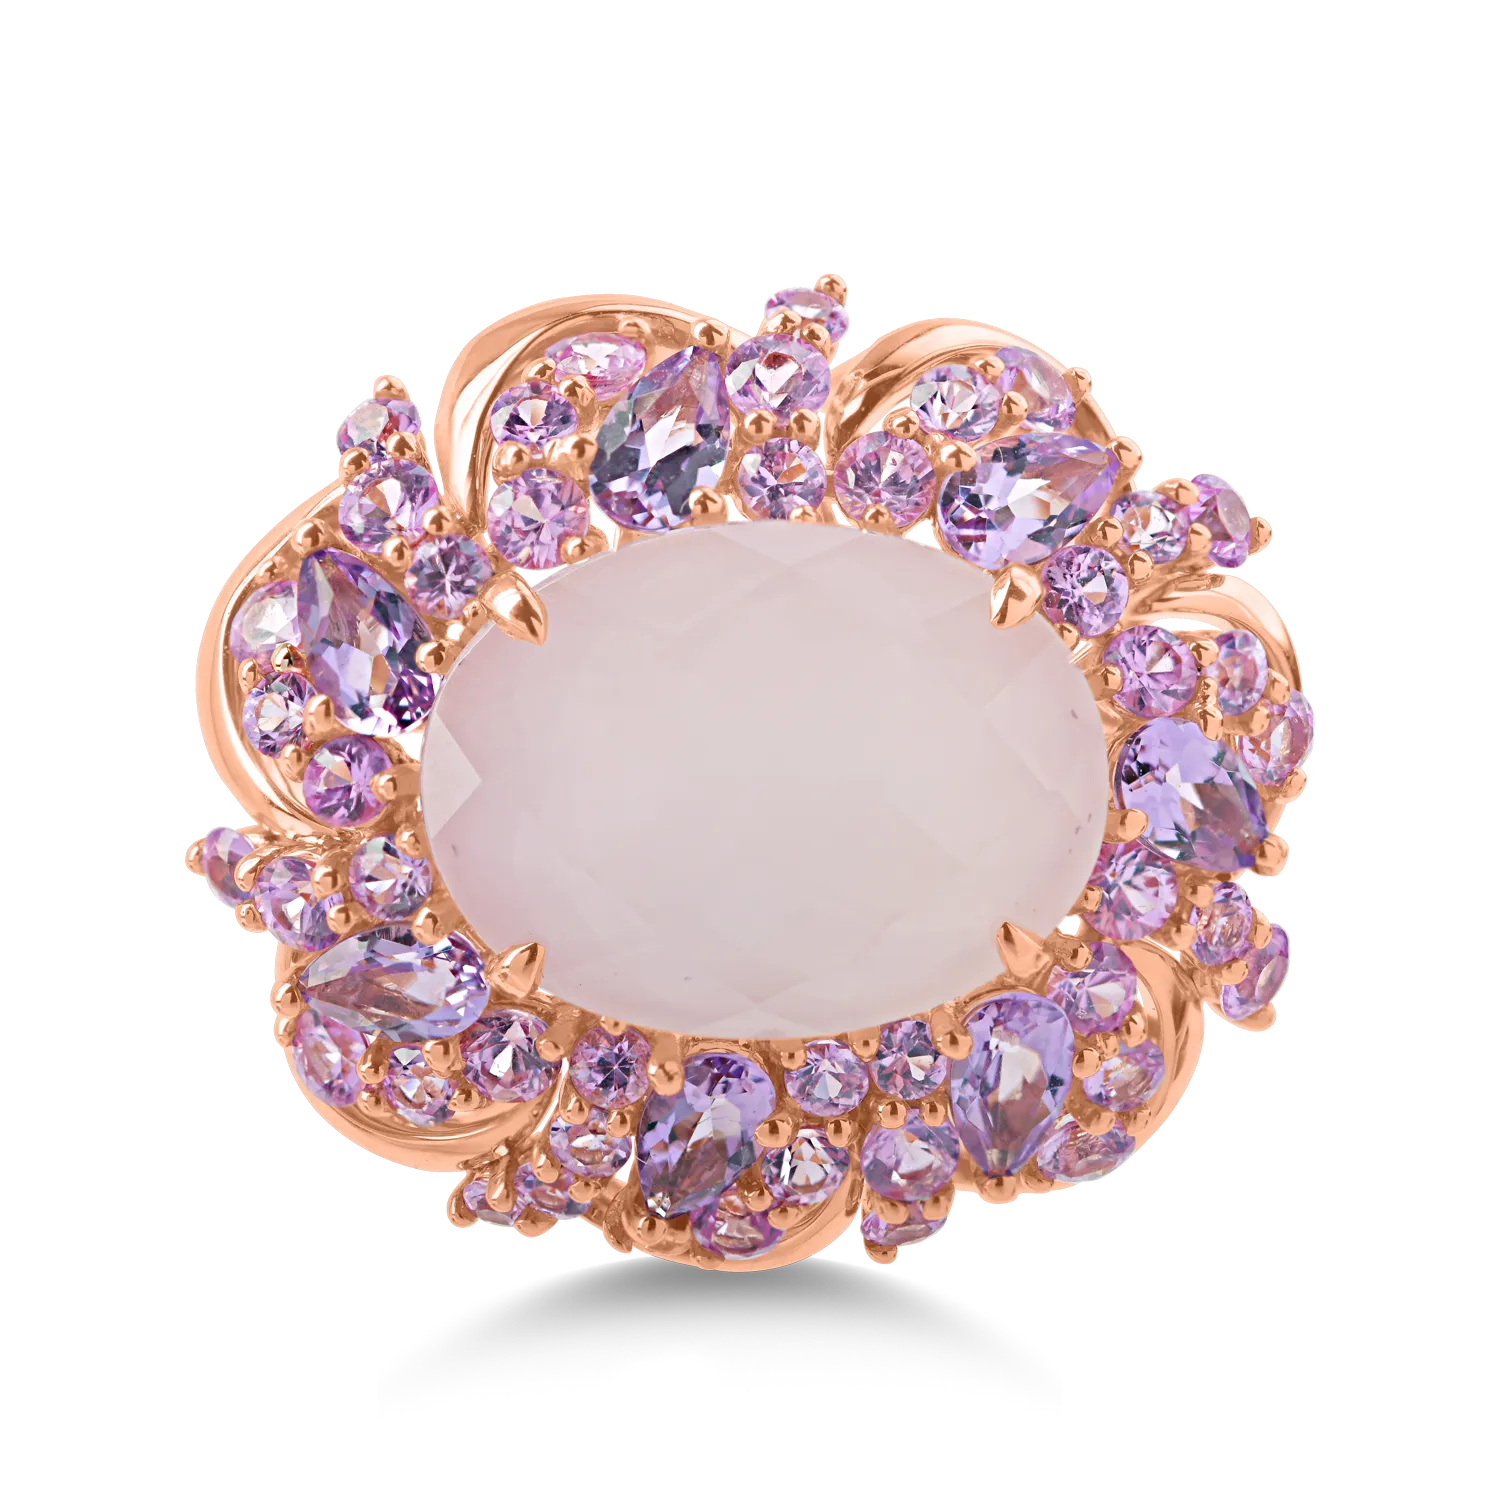 Rose gold ring with 13.2ct semi-precious stones